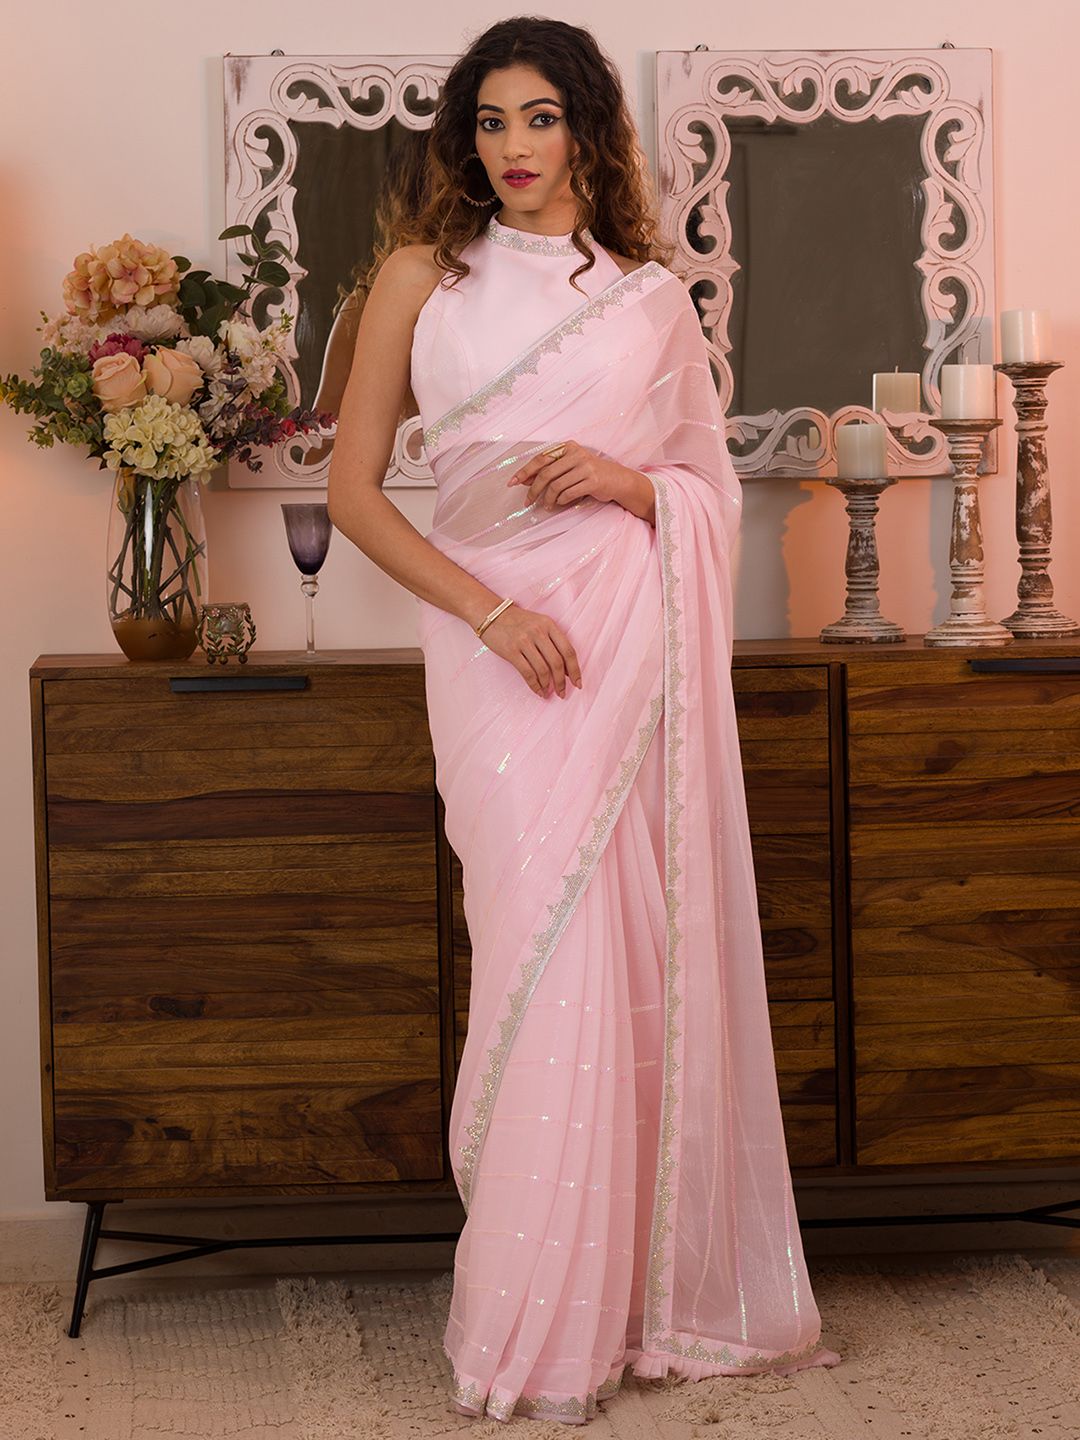 Koskii Pink & Silver-Toned Striped Beads and Stones Saree Price in India